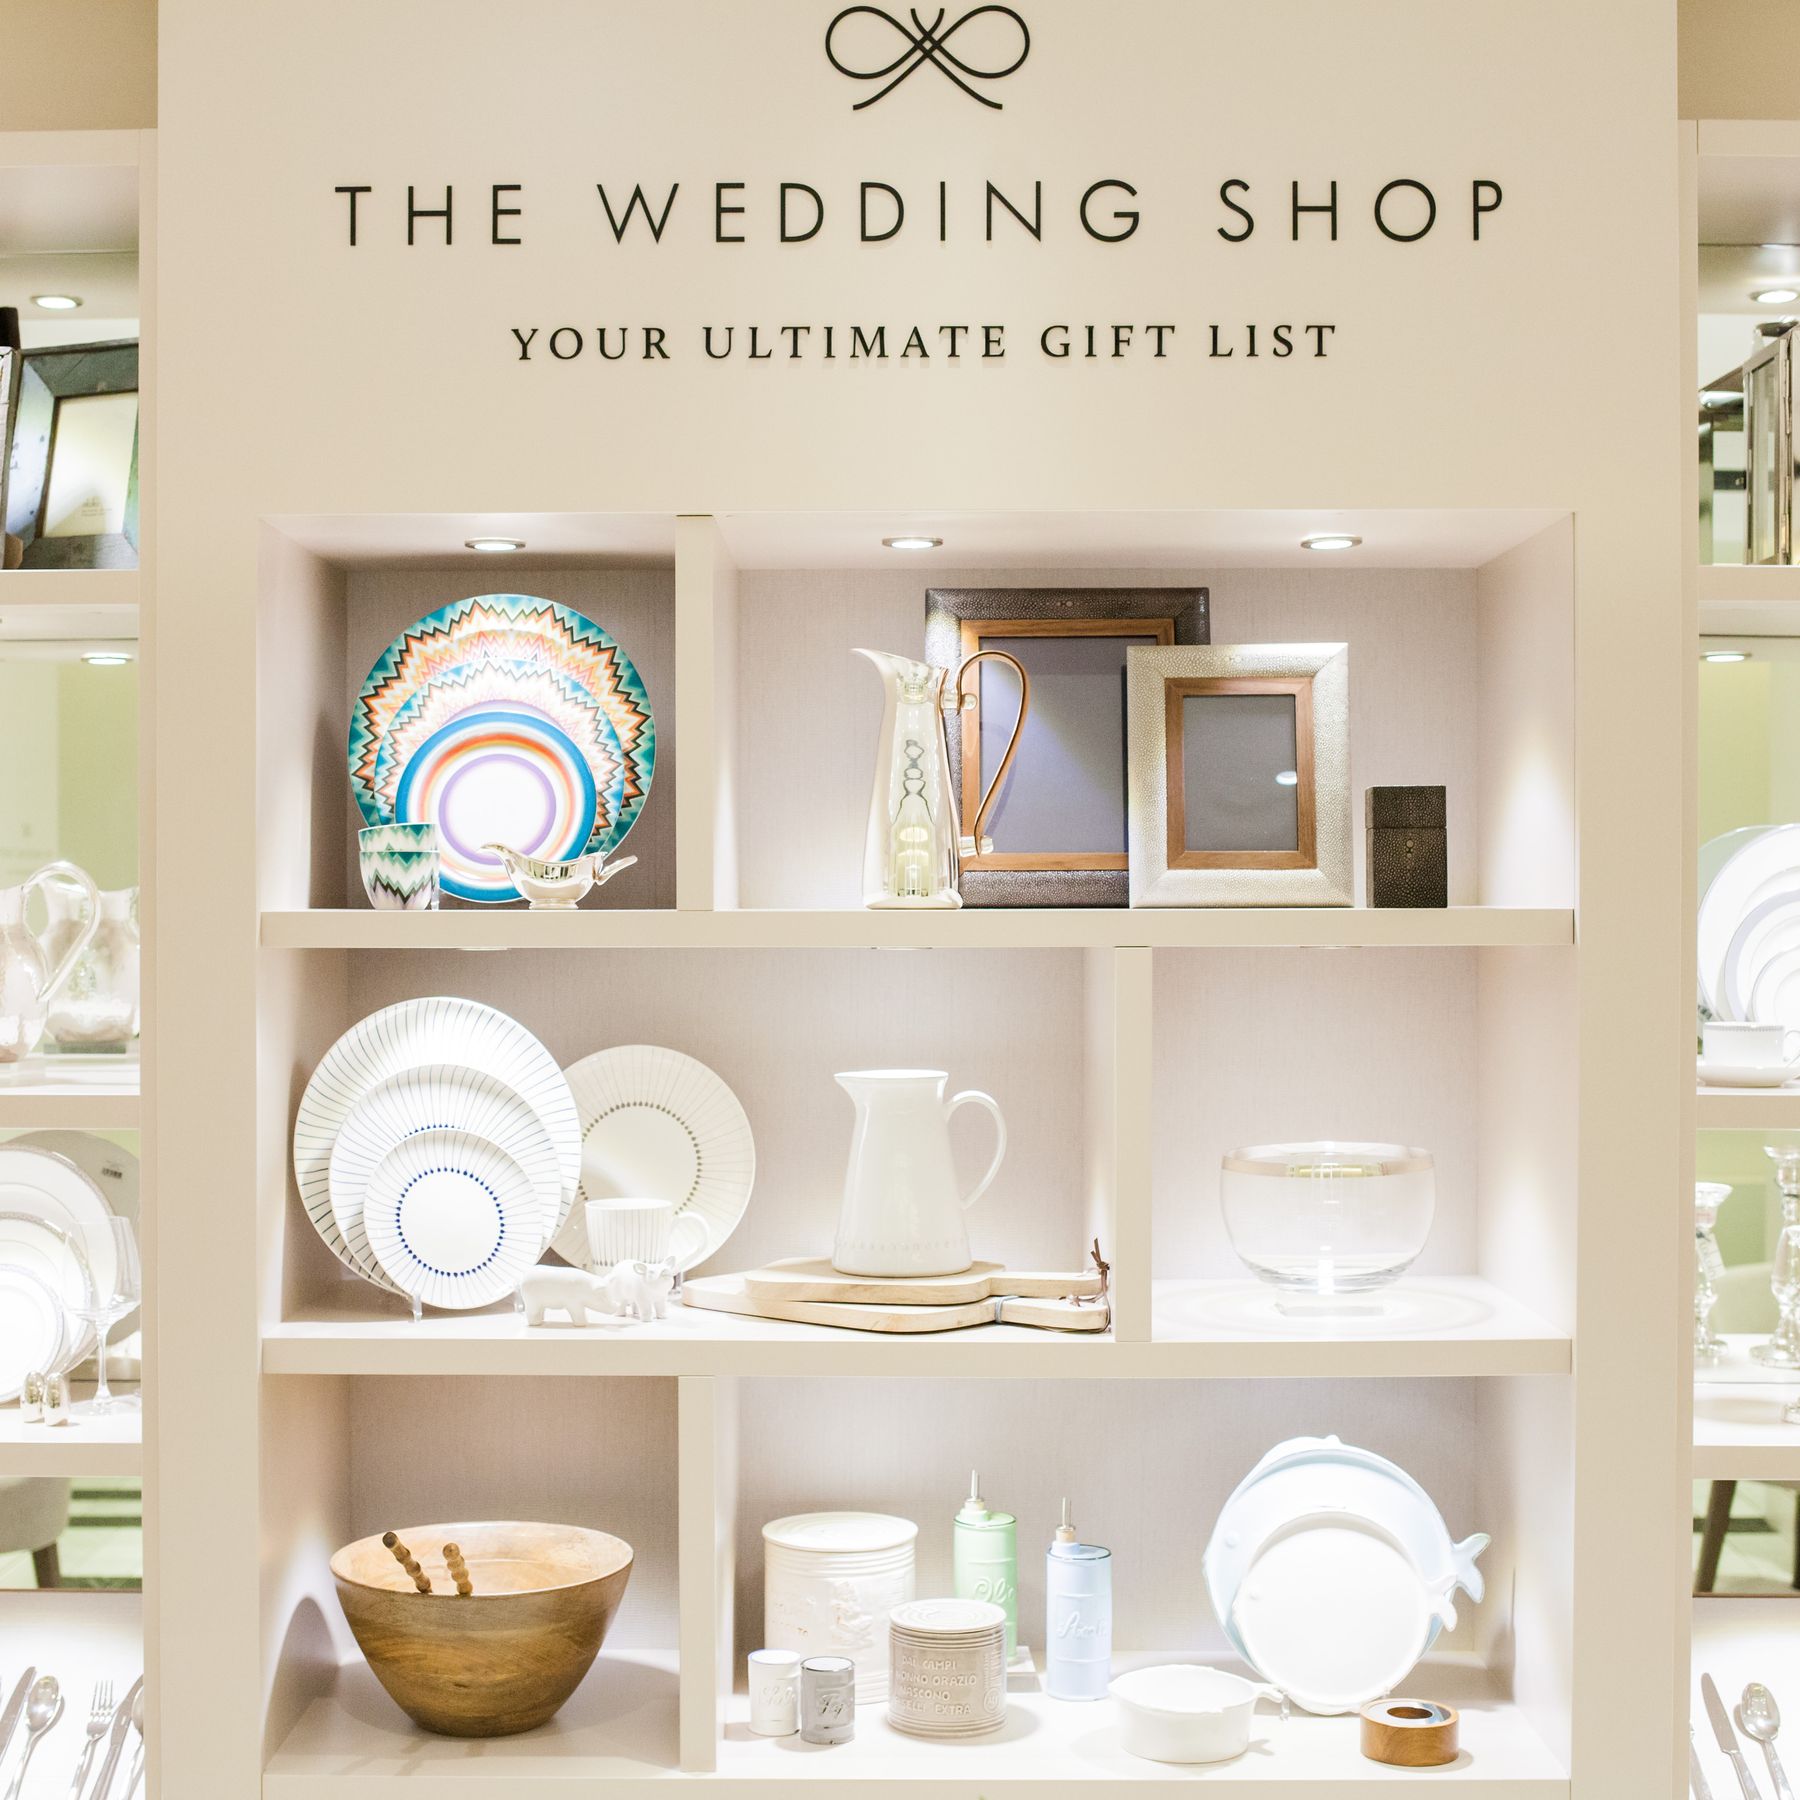 Mariage Frères opens at Selfridges - The House Directory